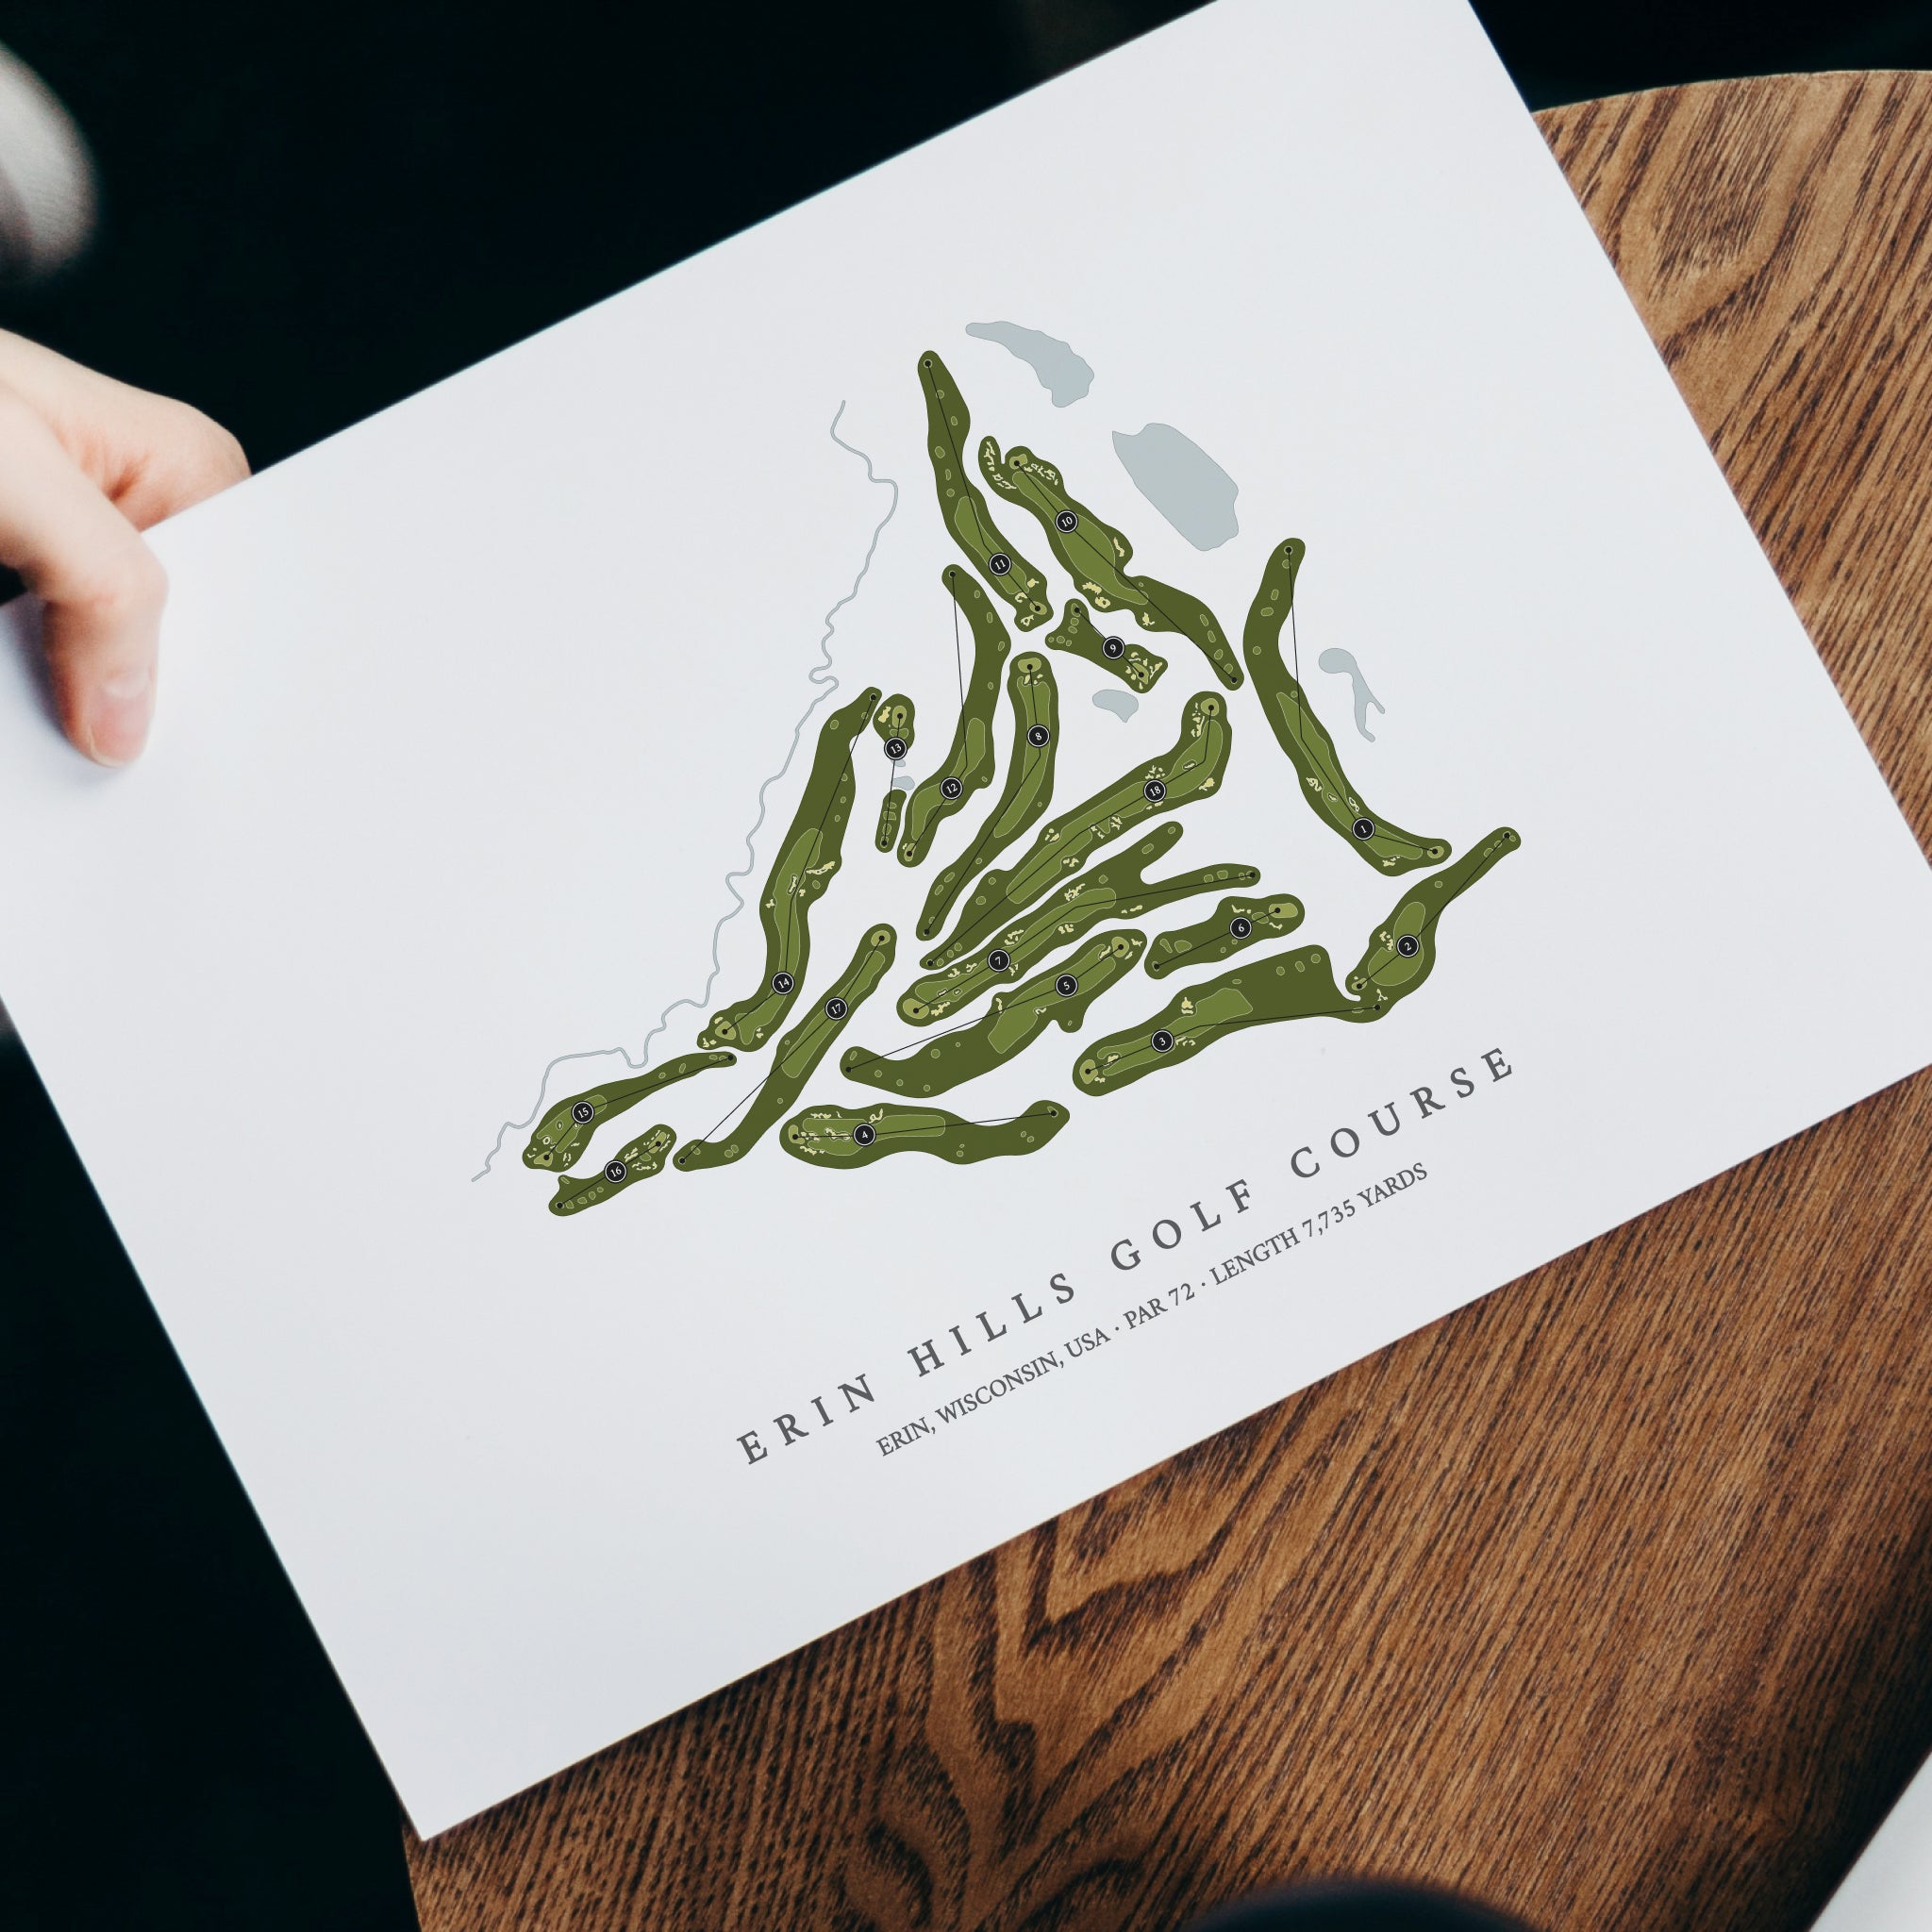 Erin Hills Golf Course| Golf Course Print | With Laptop 